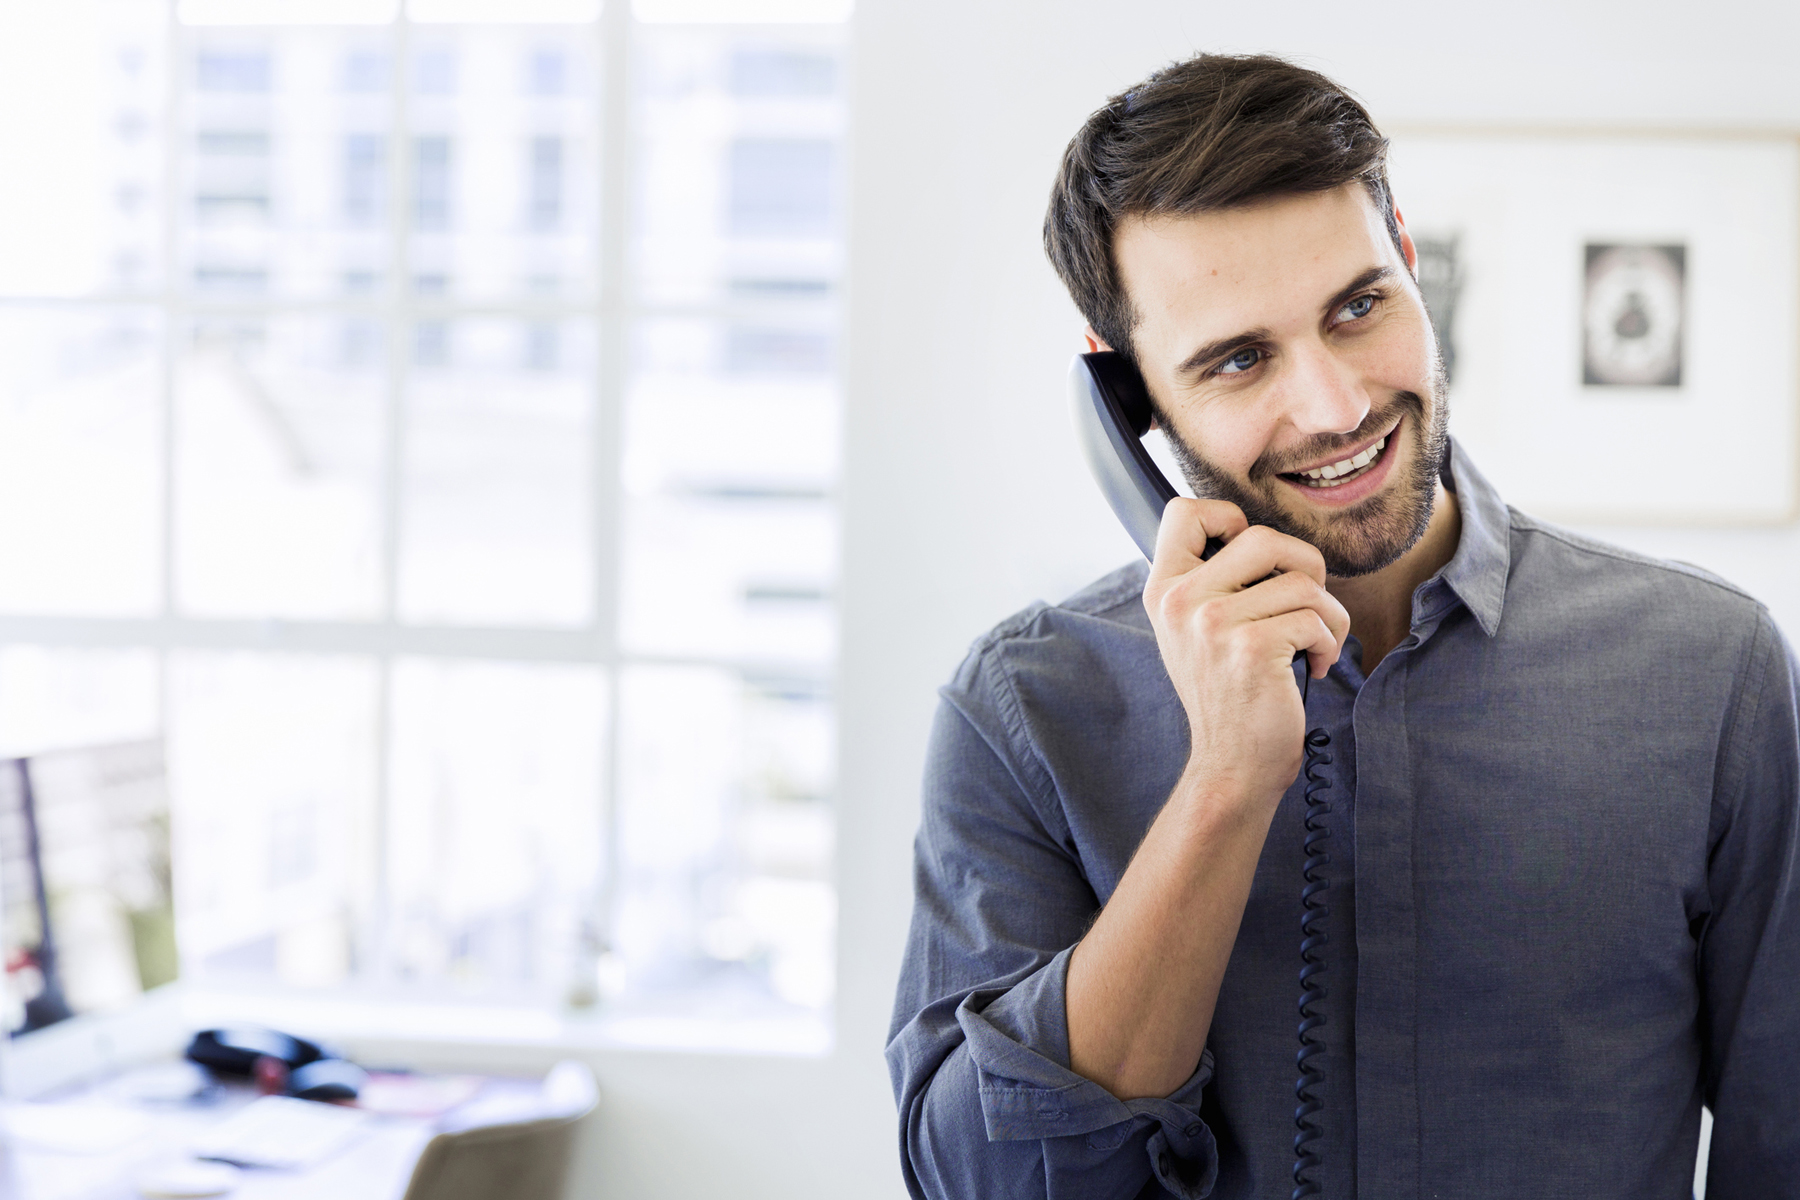 man smiling on phone - happy to save money on his phone bill